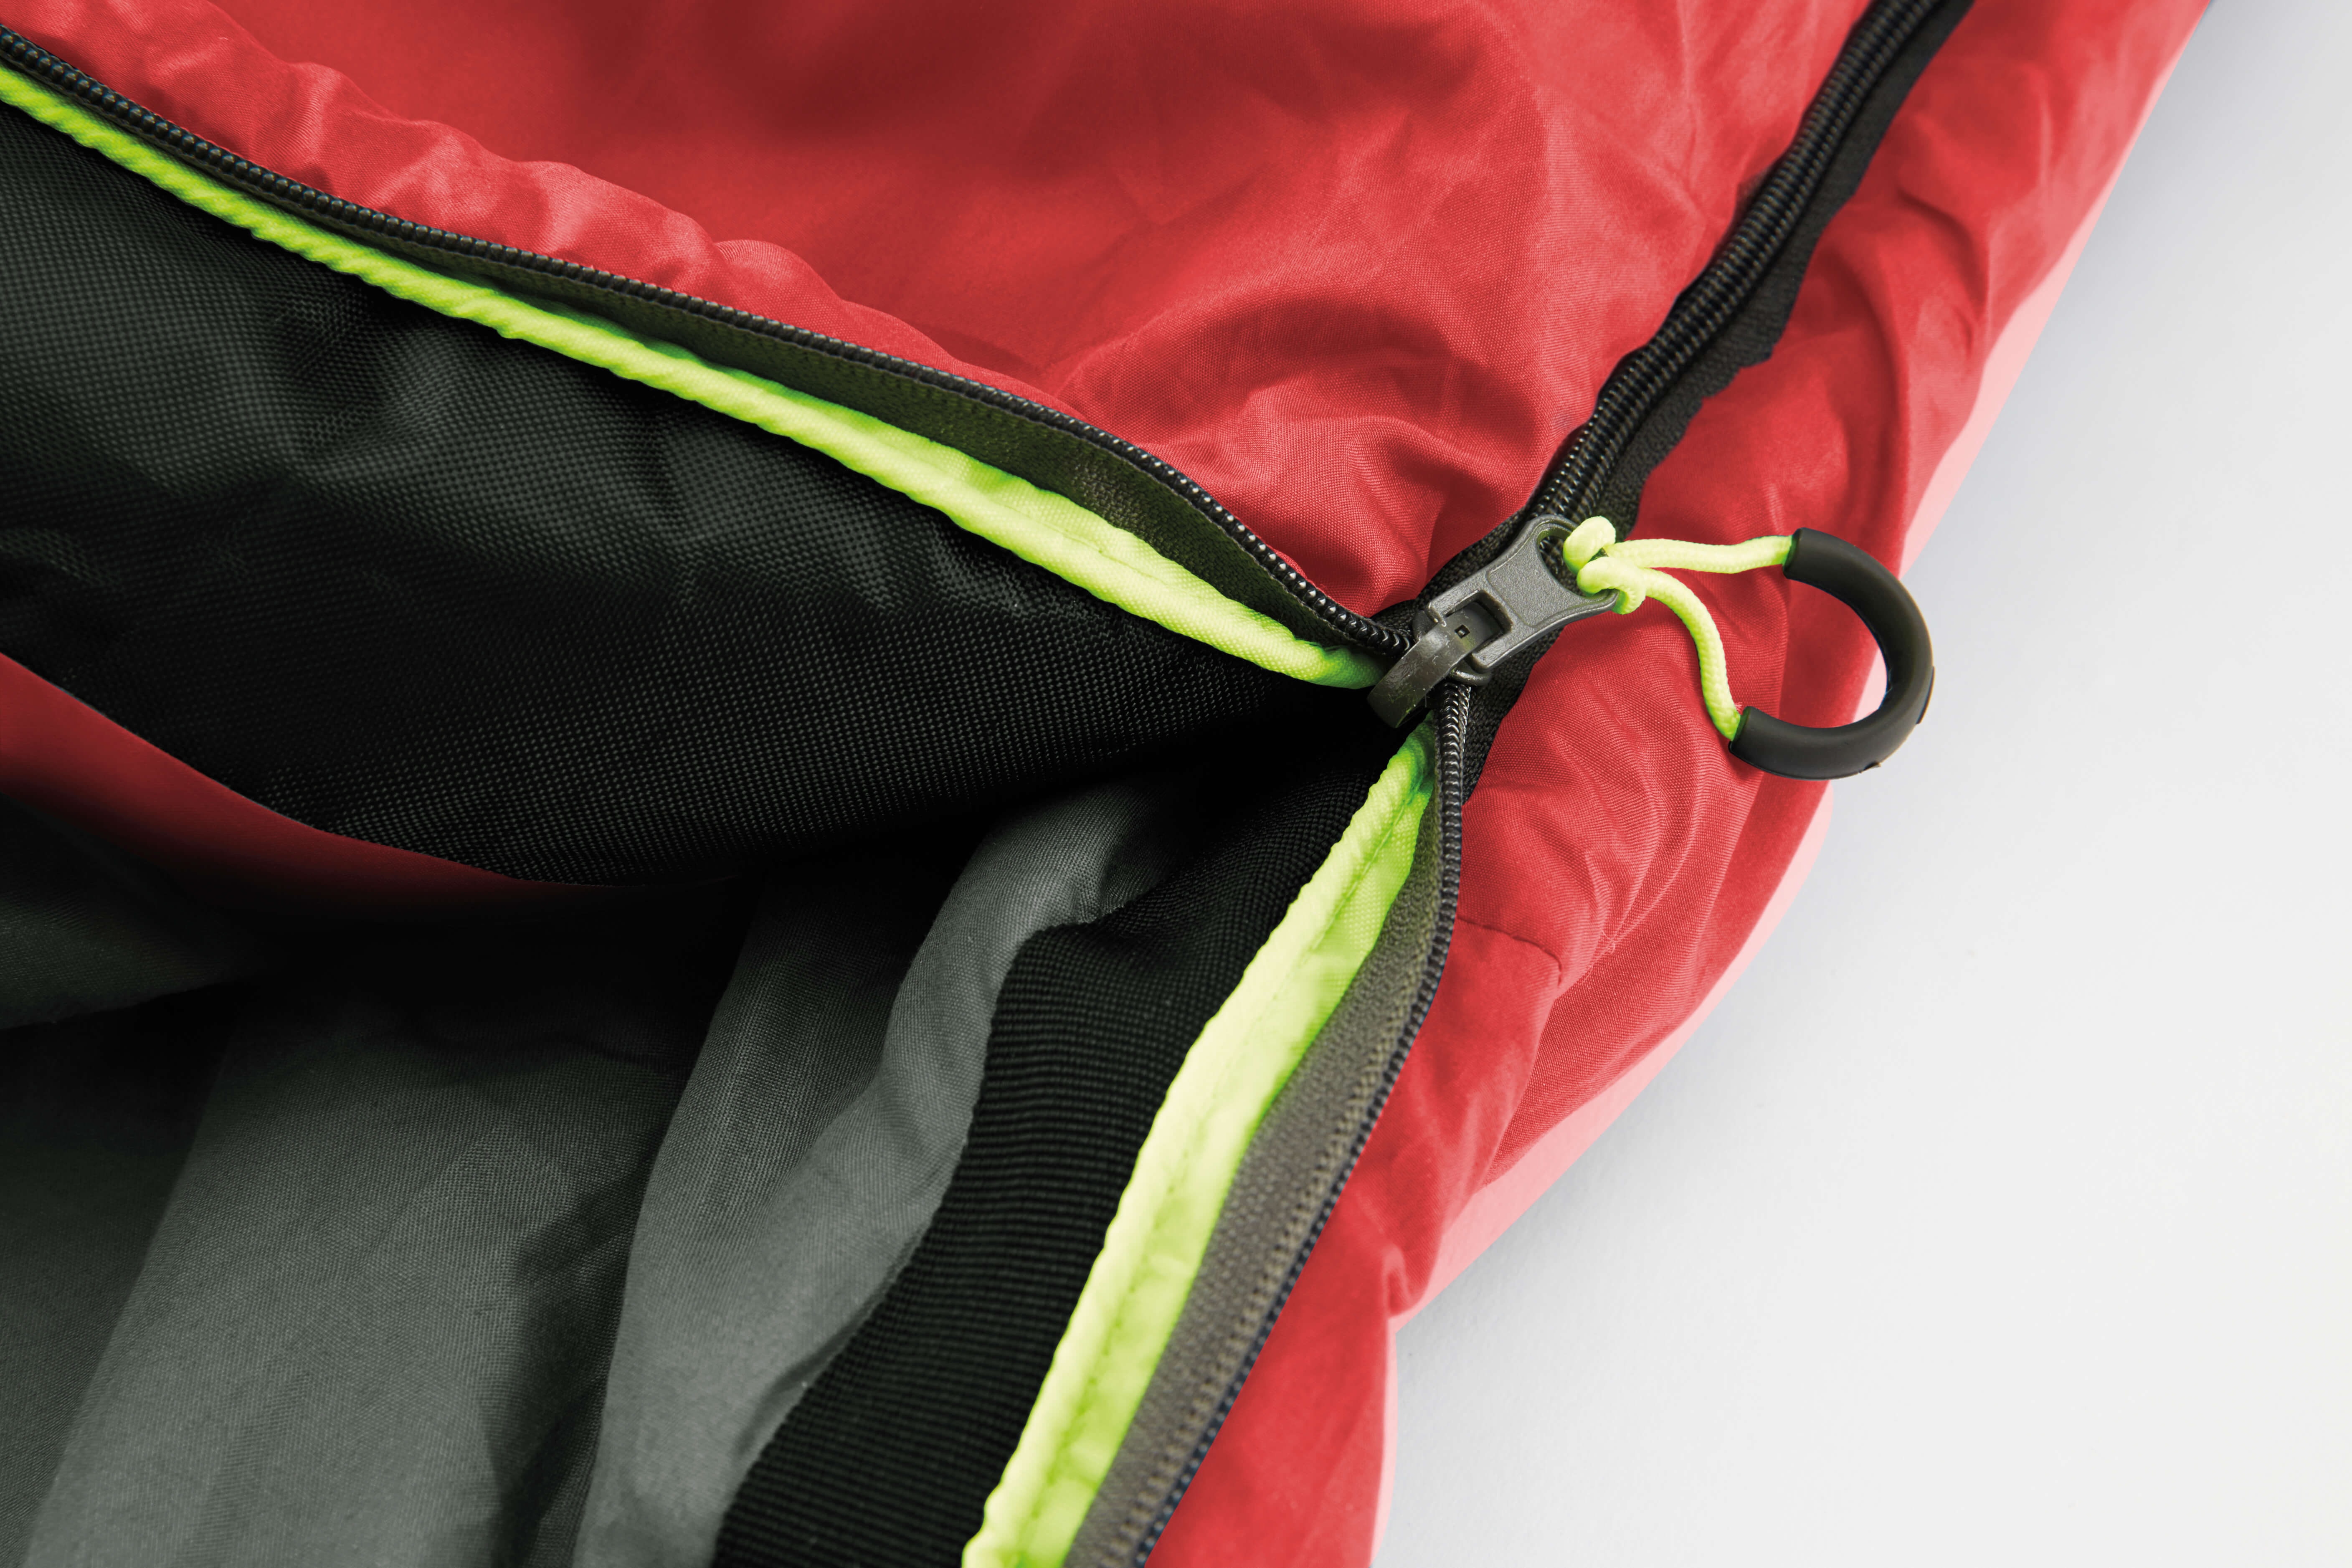 Outwell Schlafsack "Campion", lux rot